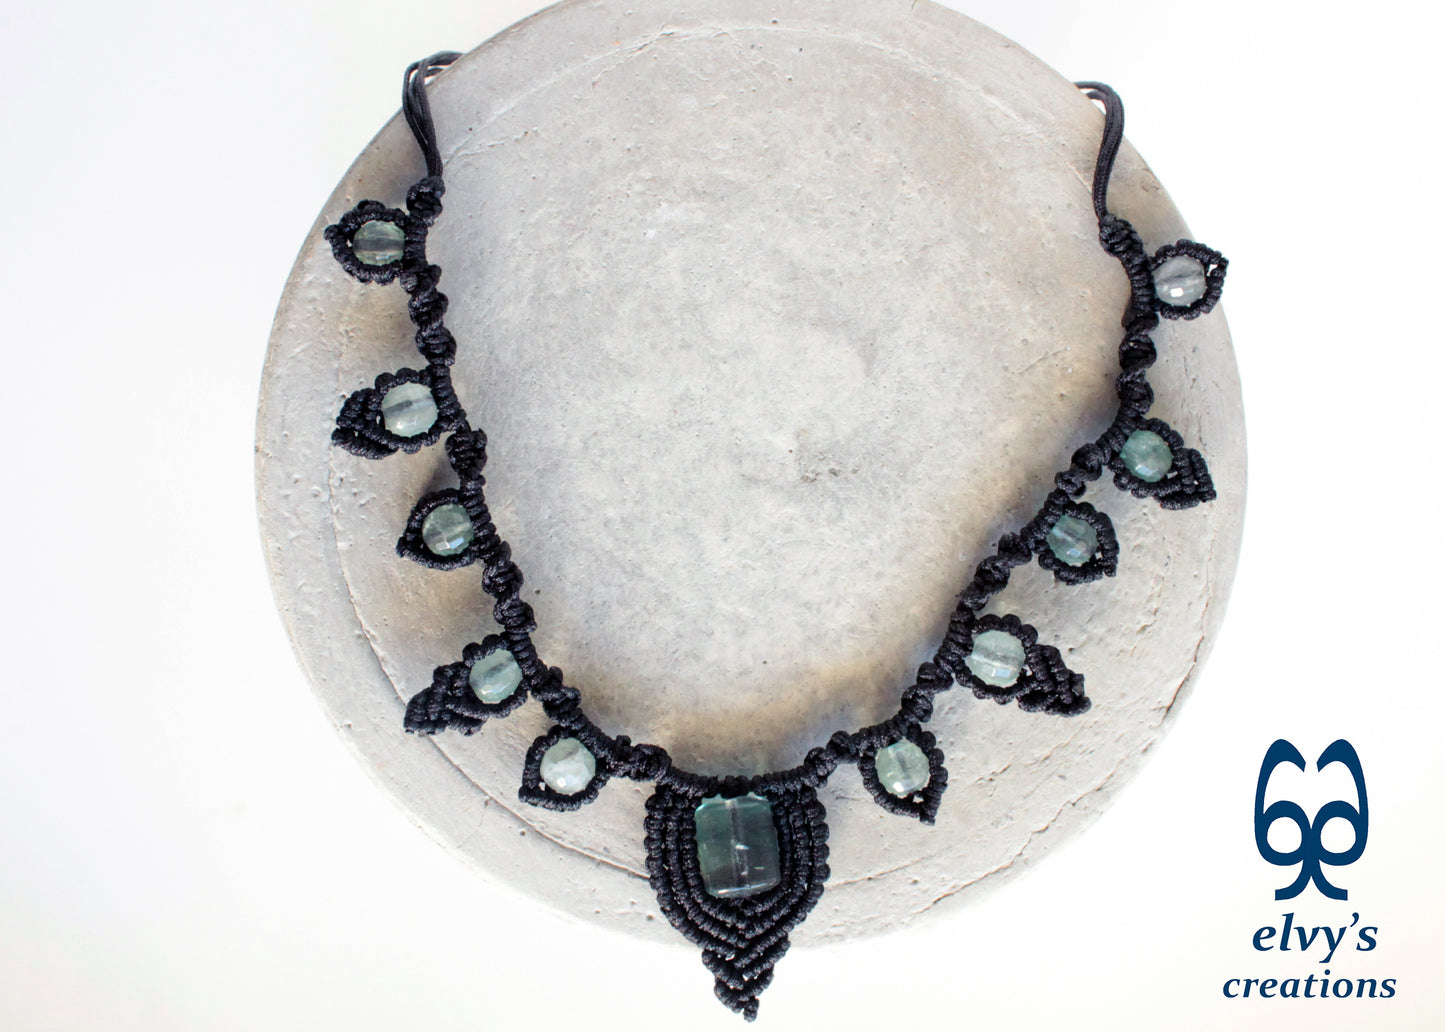 Macrame Black Necklace with Natural Beads Fluorite Gems 'Heart Pendant' with Adjustable Ending Gift for Women